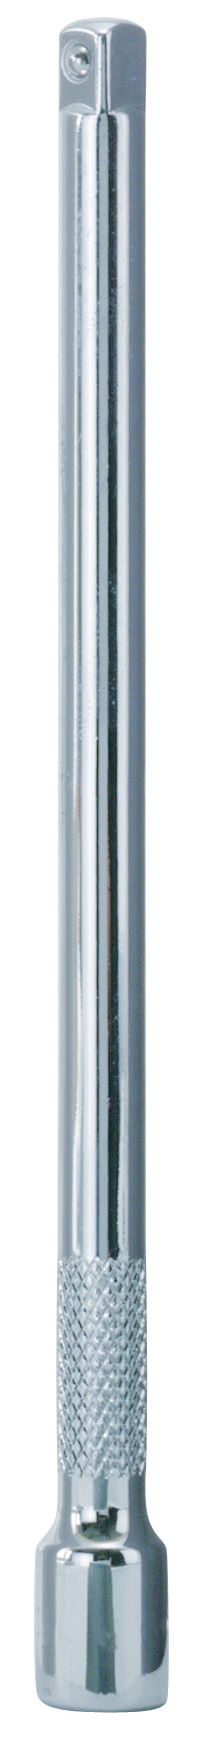 1/4 in. Drive Extension Bar, 6 in. Long